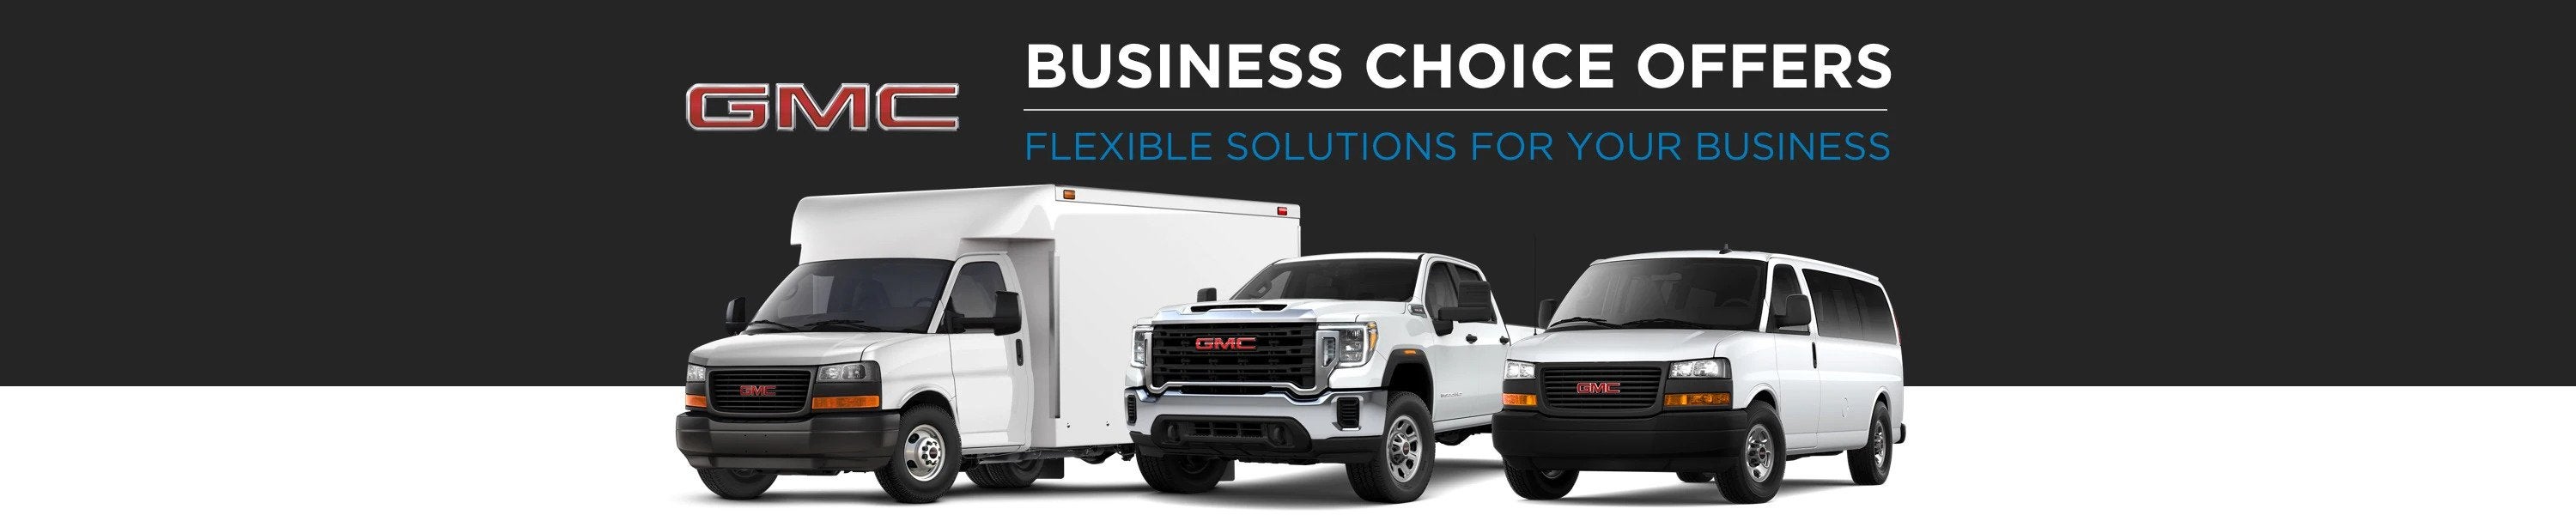 GMC Business Choice Offers - Flexible Solutions for your Business - Beaty Chevrolet in KNOXVILLE TN